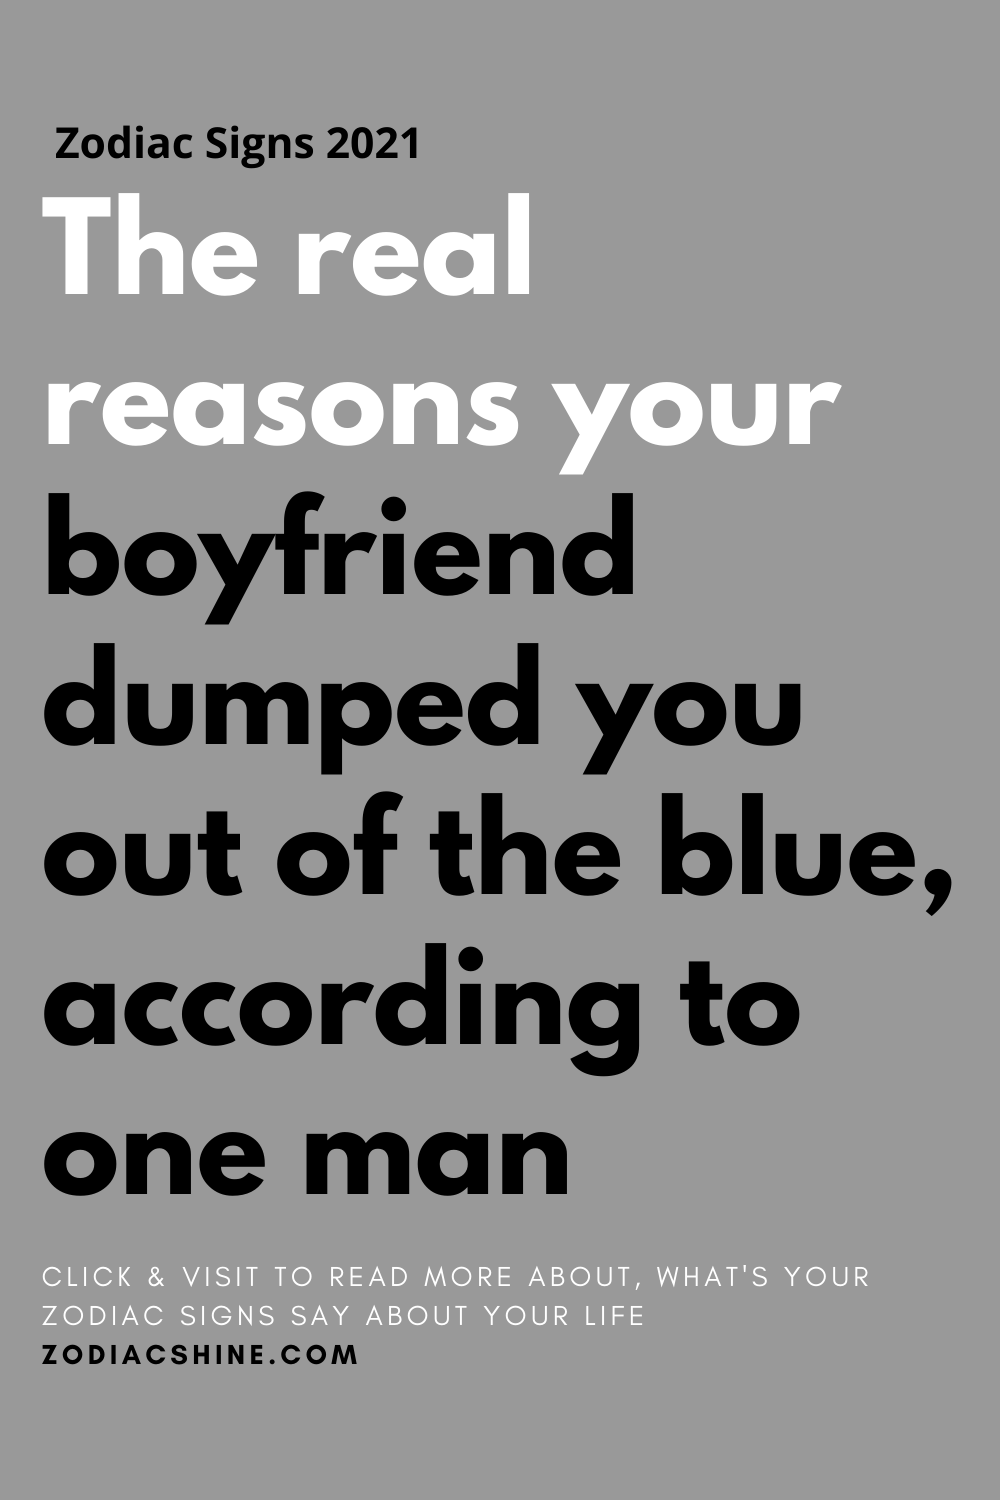 The real reasons your boyfriend dumped you out of the blue according to one man